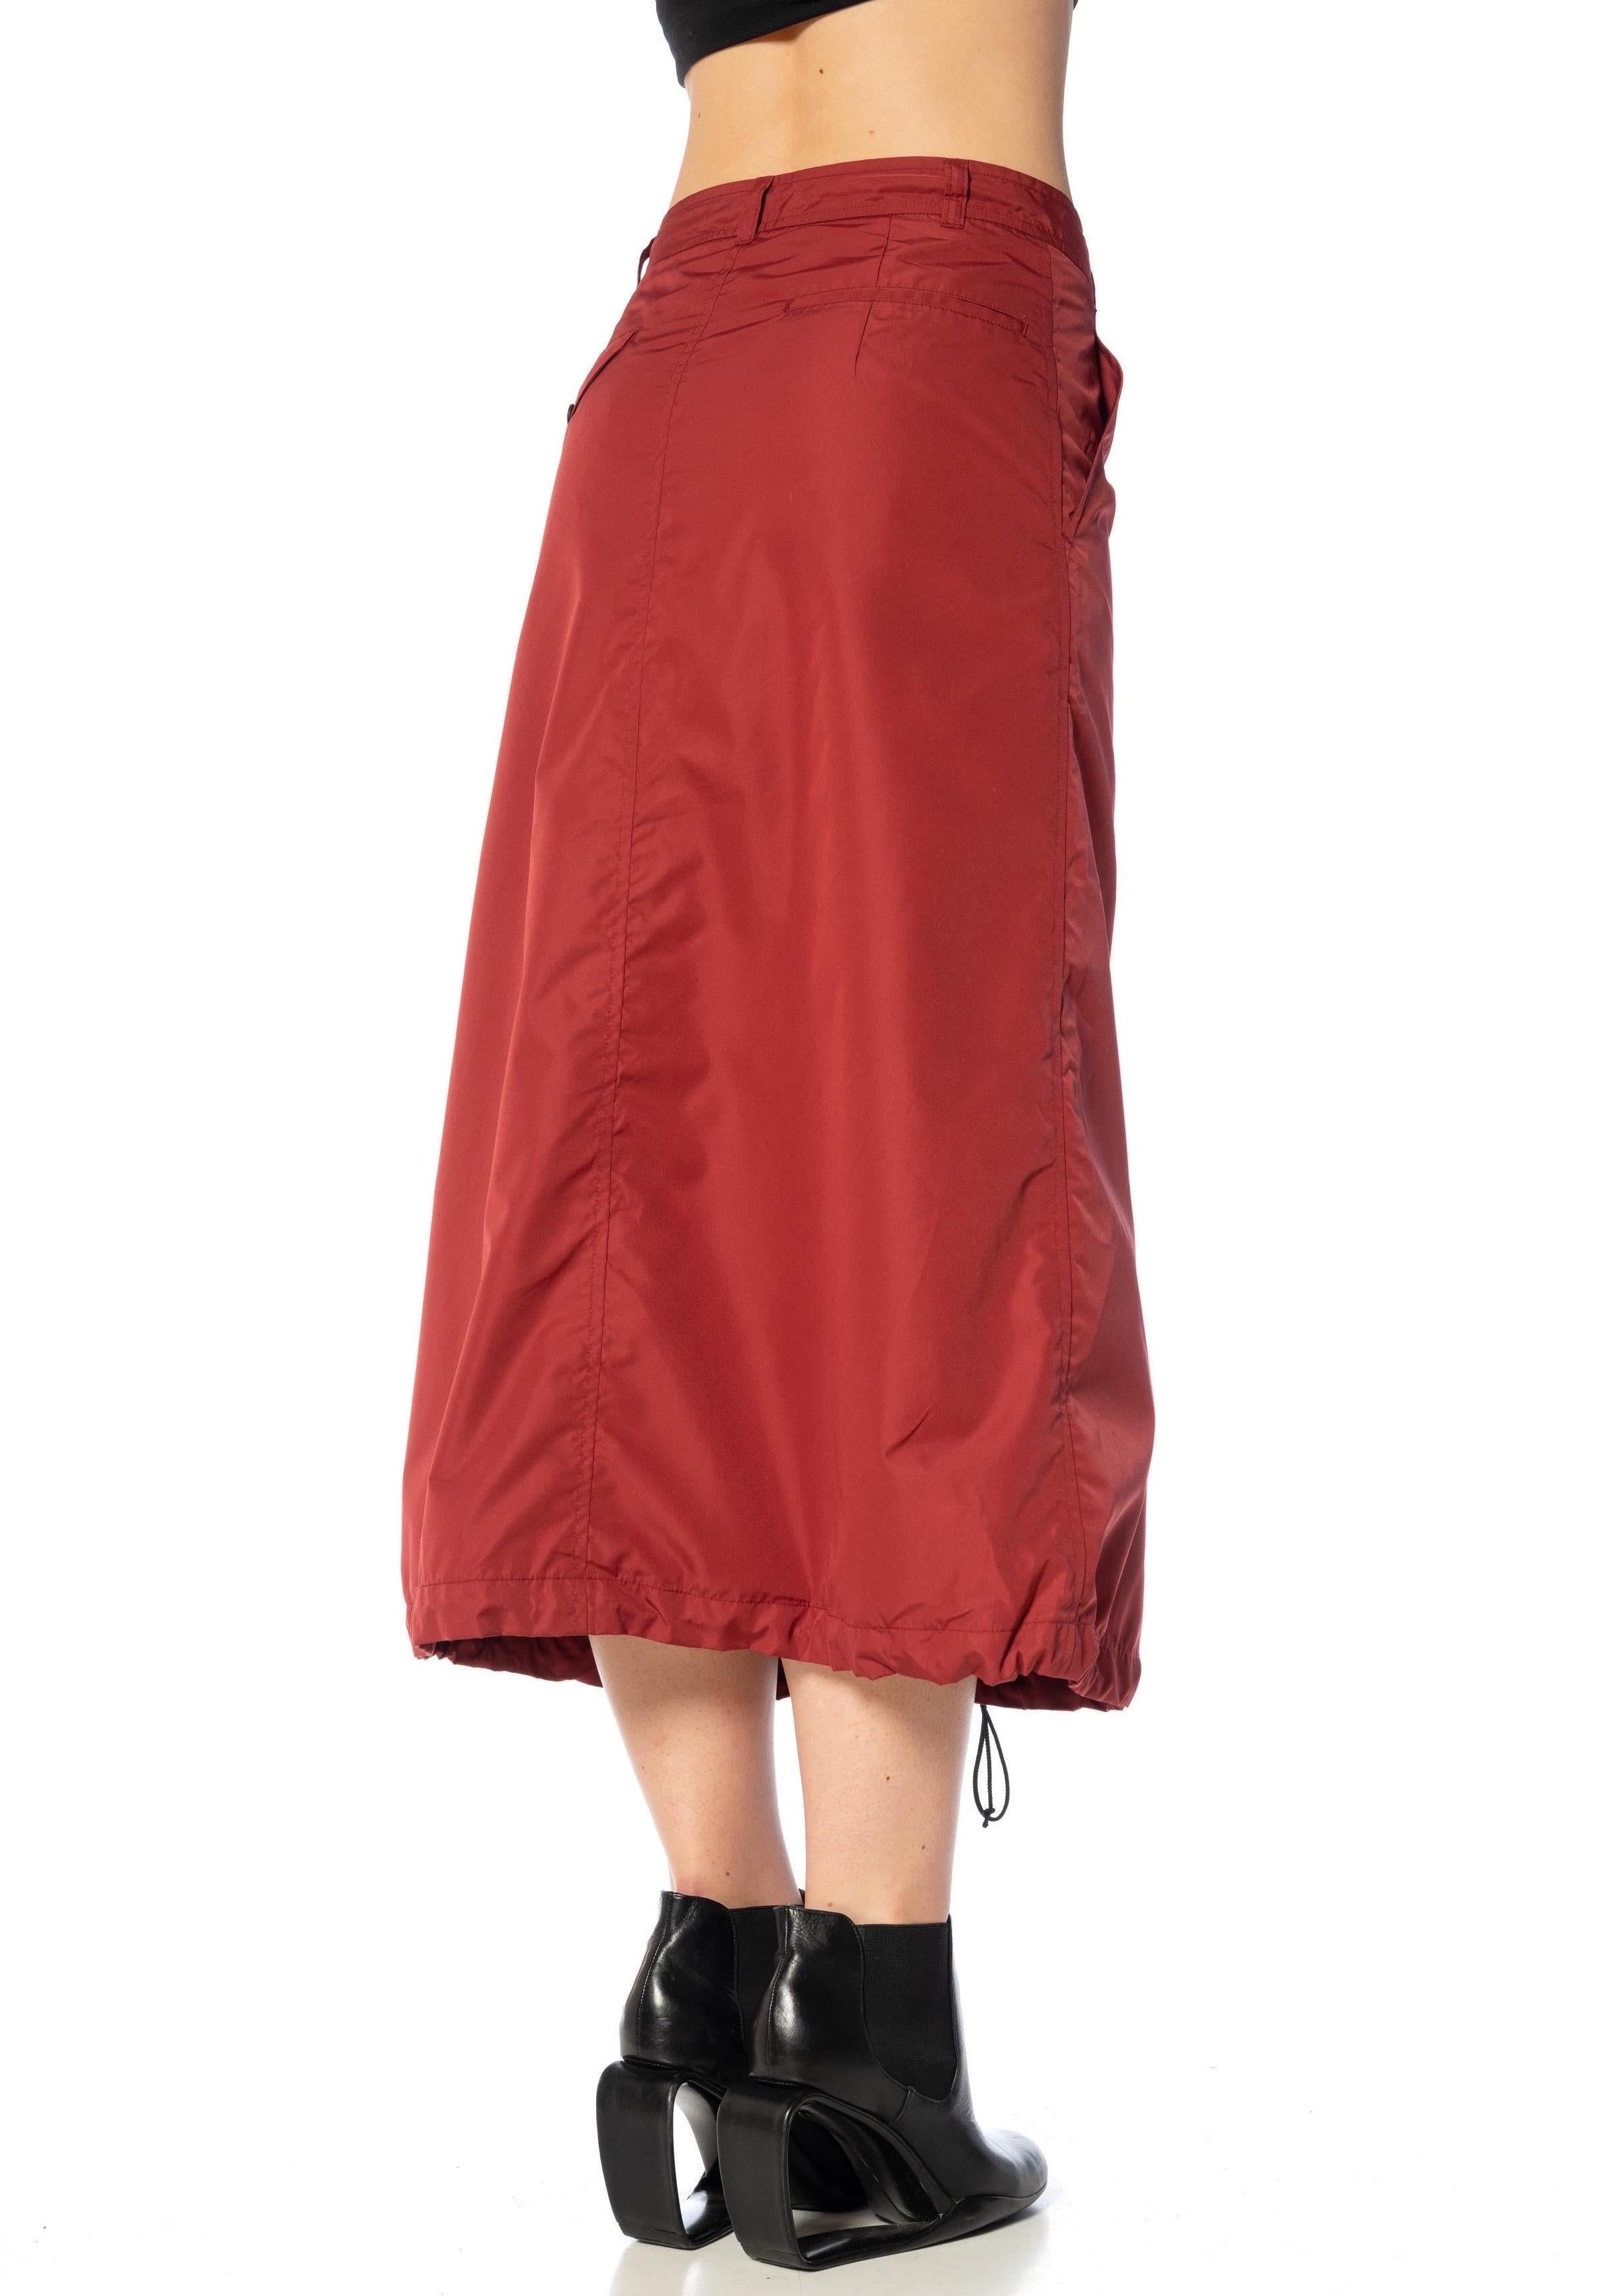 2000S COMME DES GARCONS Burgundy Polyester Parachute Skirt With Drawstring Hem  For Sale 2